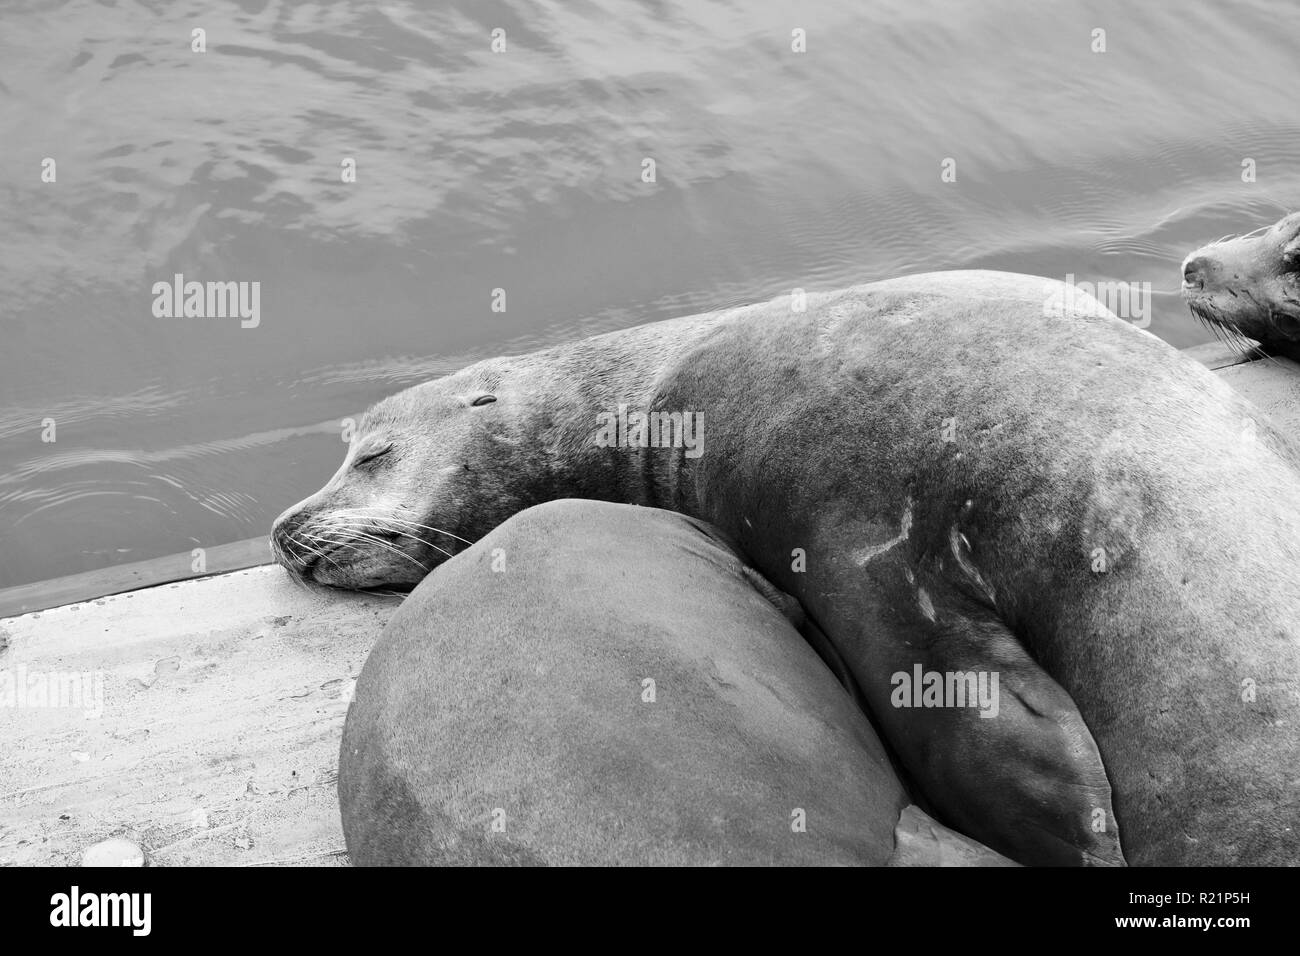 California Sea Lion resting on dock in black and white Stock Photo